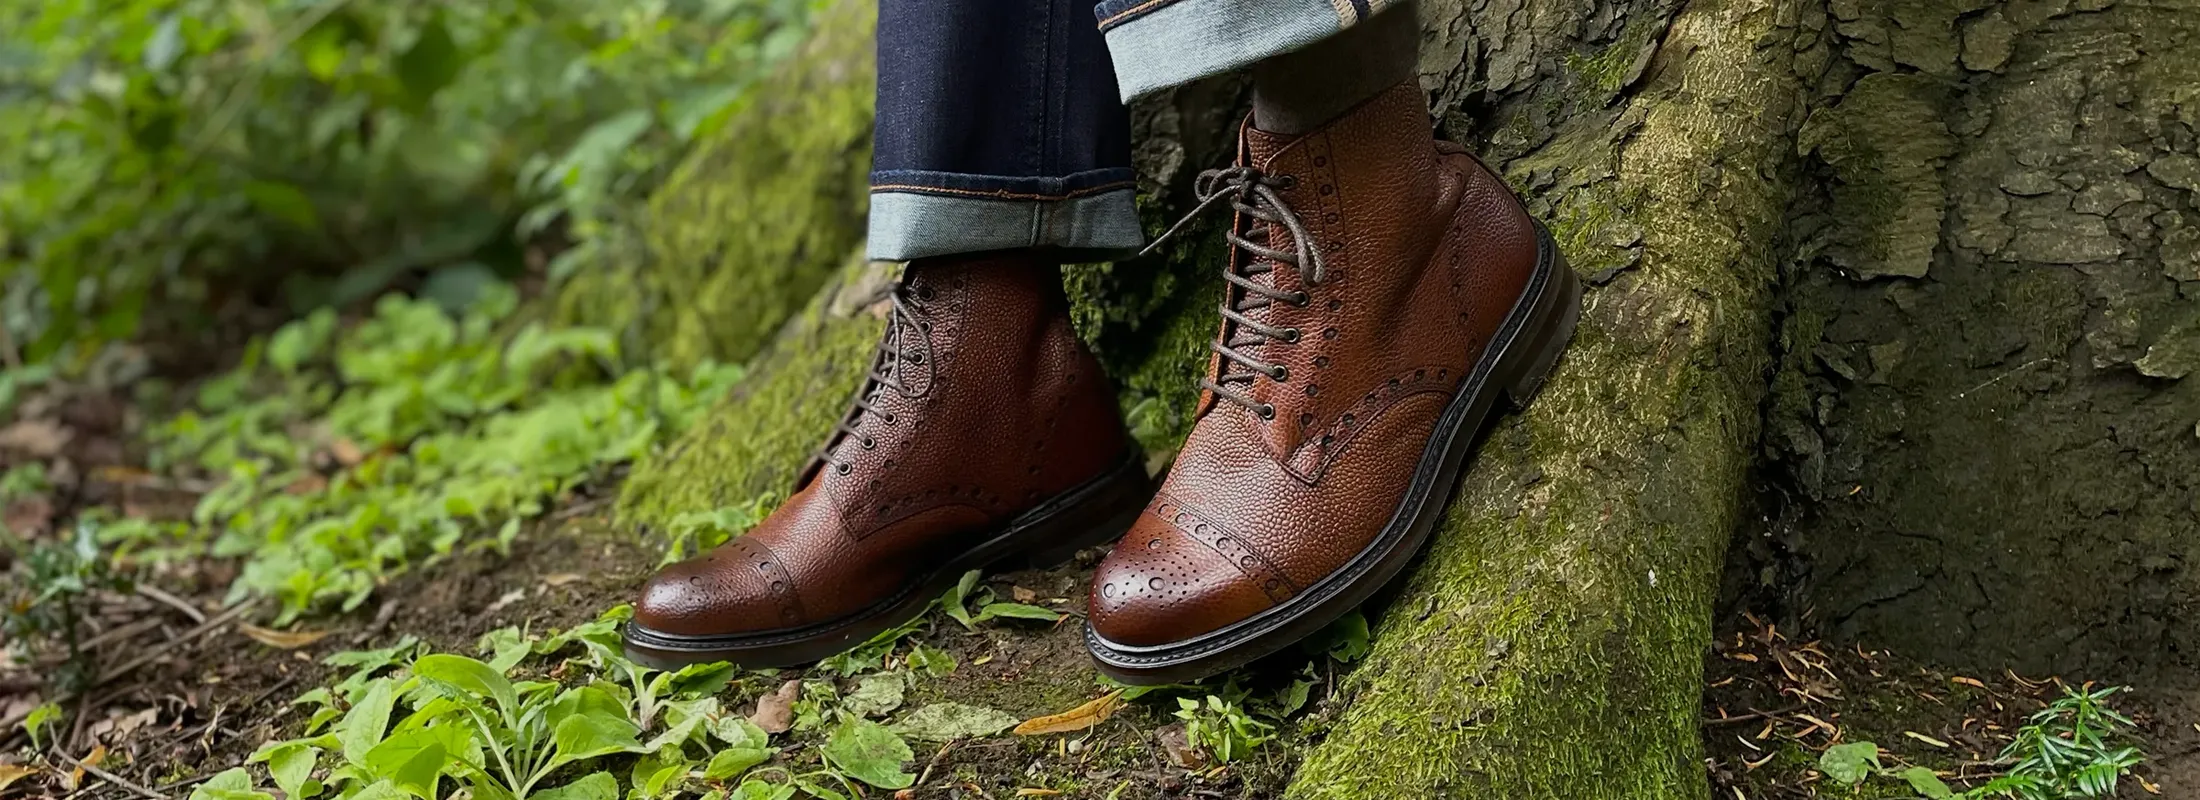 Man walking in forest, wearing his Loake Seasonal Winter Boots. Shoes shown are Loxley in Brown Grain leather